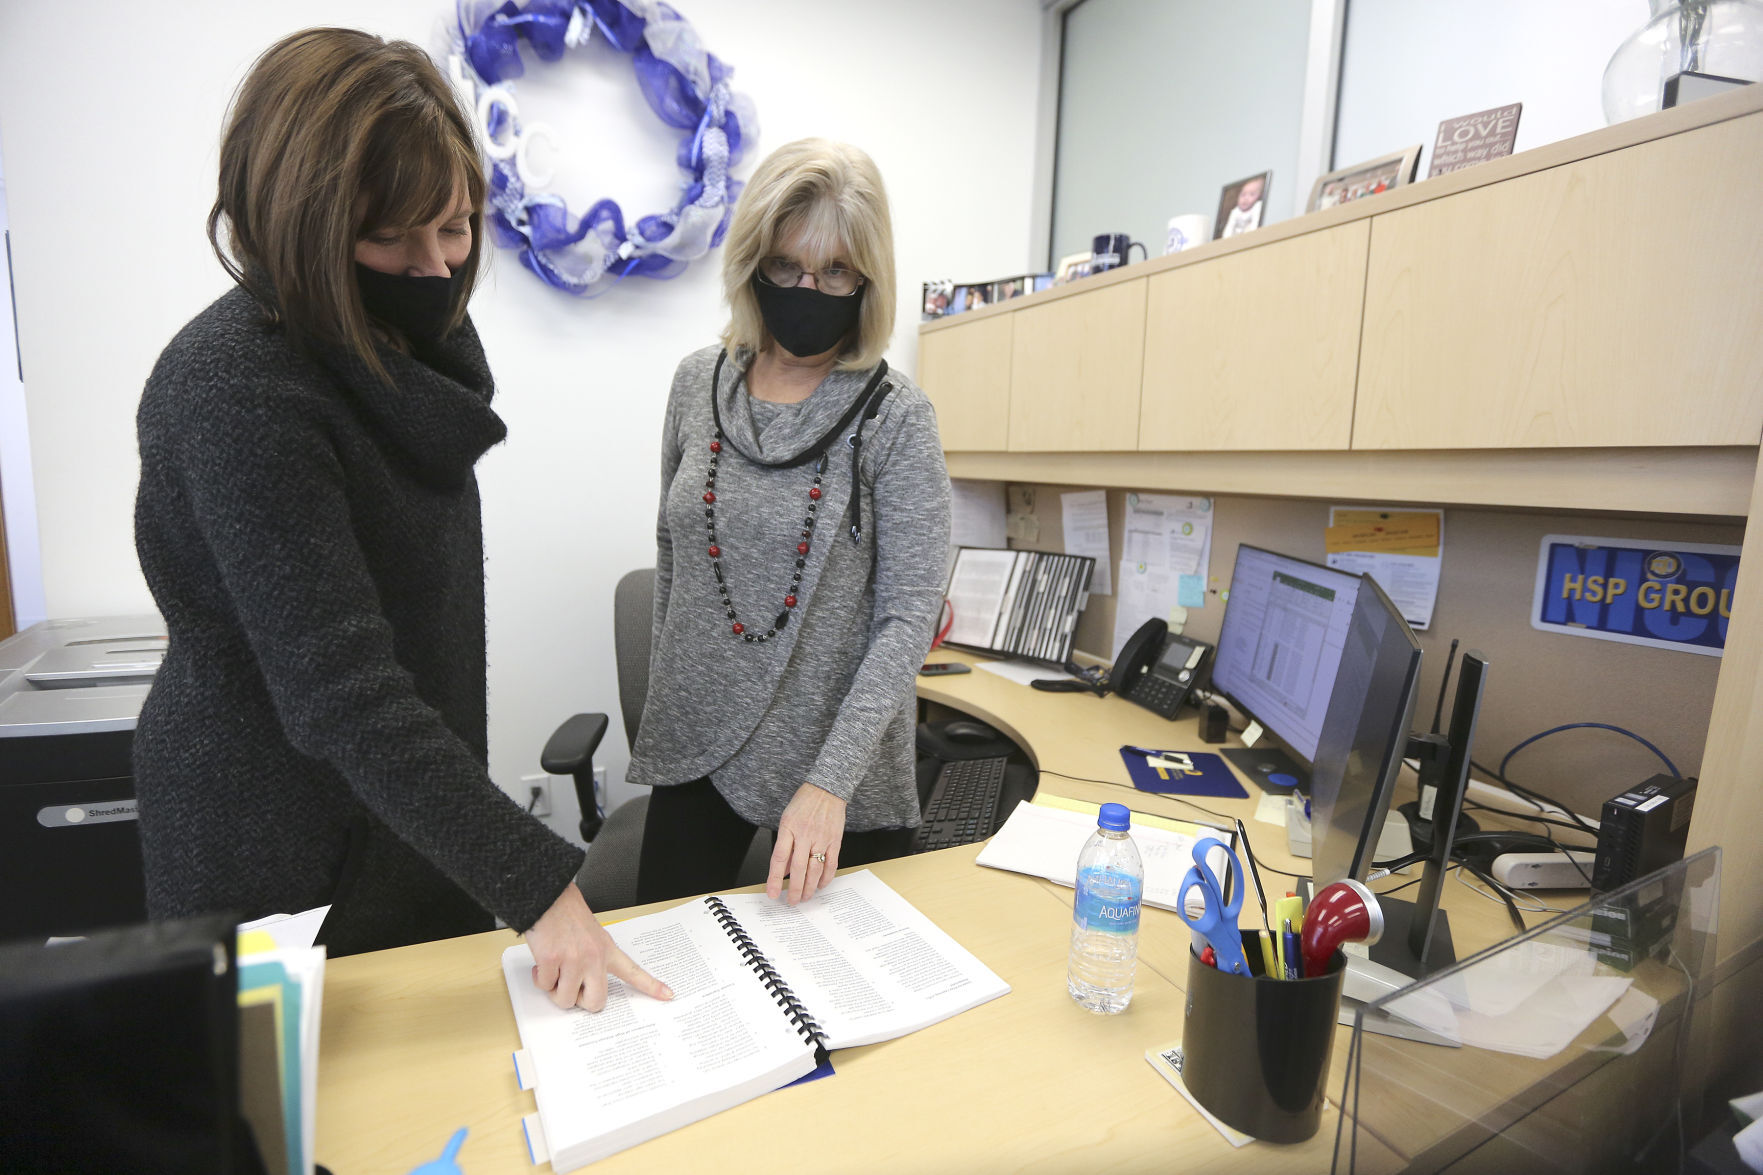 Katie Gilbert (left) works with staff member Janet Smith. PHOTO CREDIT: Dave Kettering